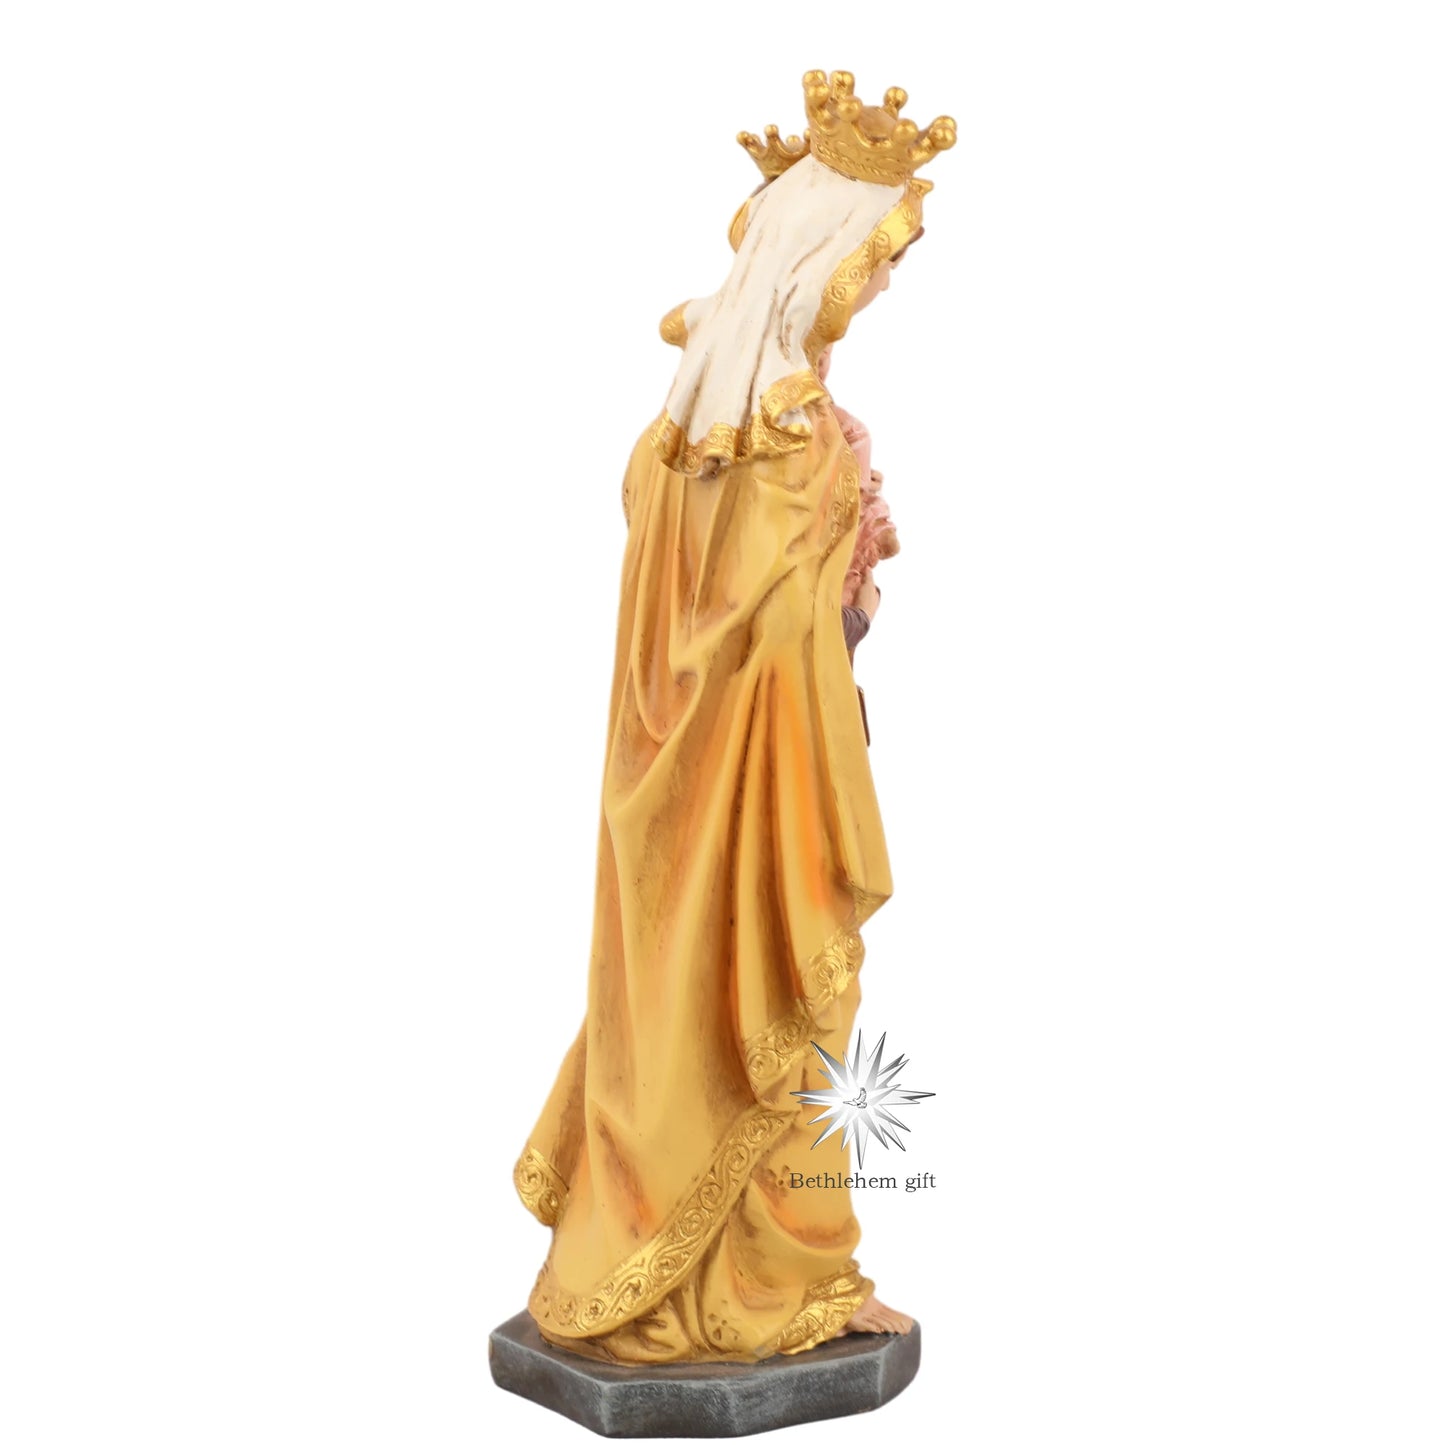 25cmH  Our Lady of Mount Carmel Virgin Mary & Child Statue Sculpture Holy Figurine for Home Catholic Decorative Ornament